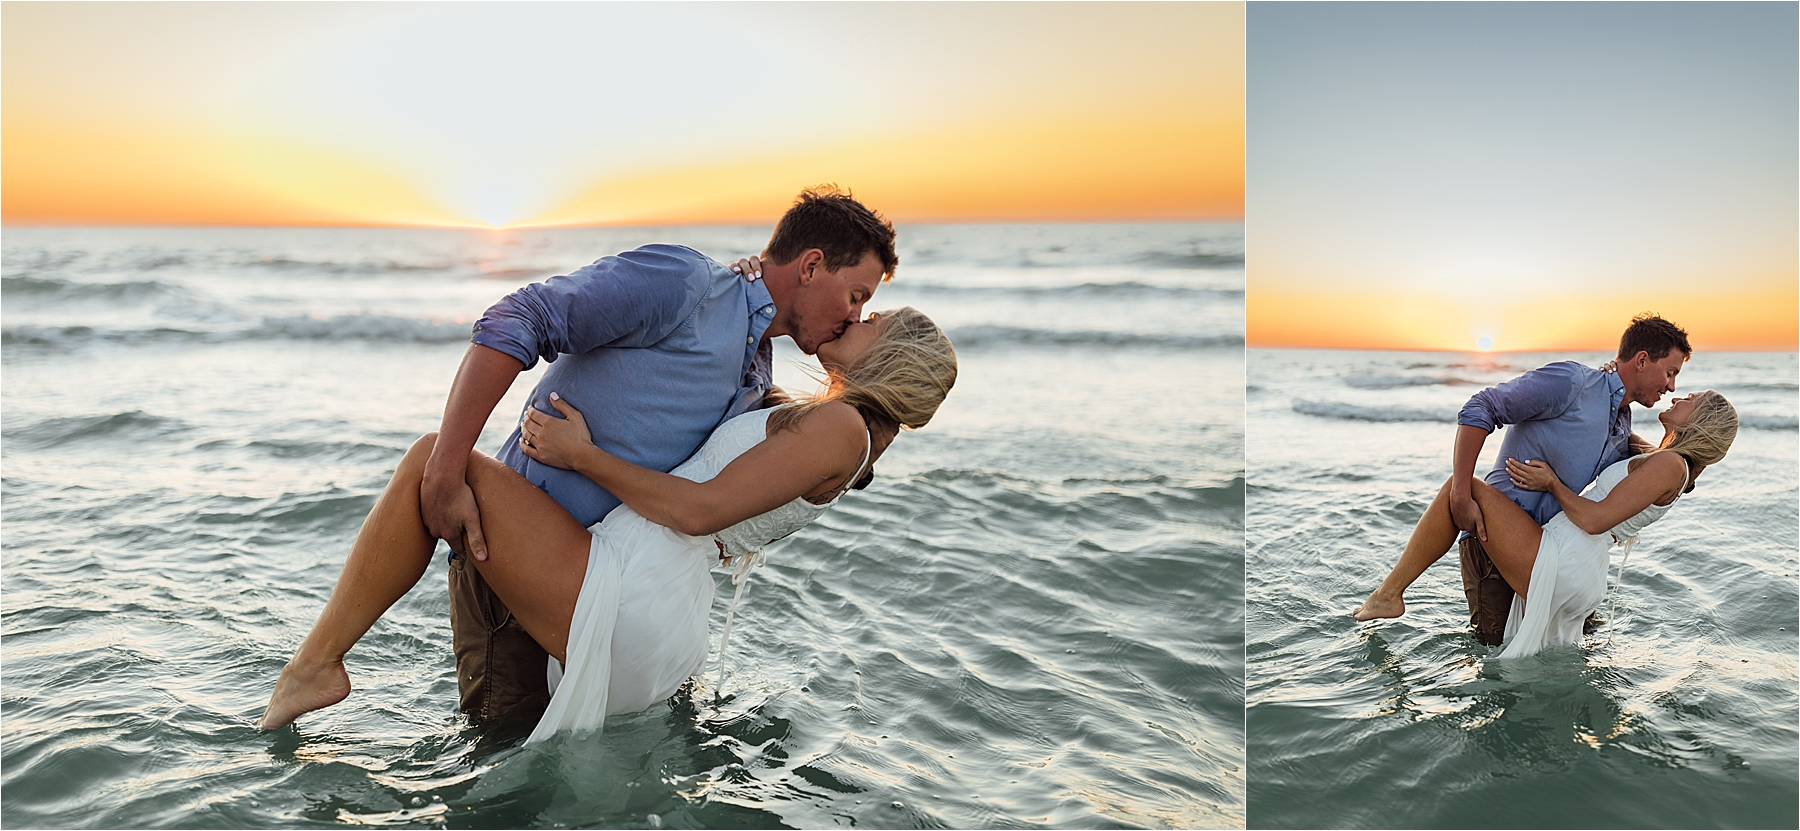 In water dip kiss at sunset for engagement photos